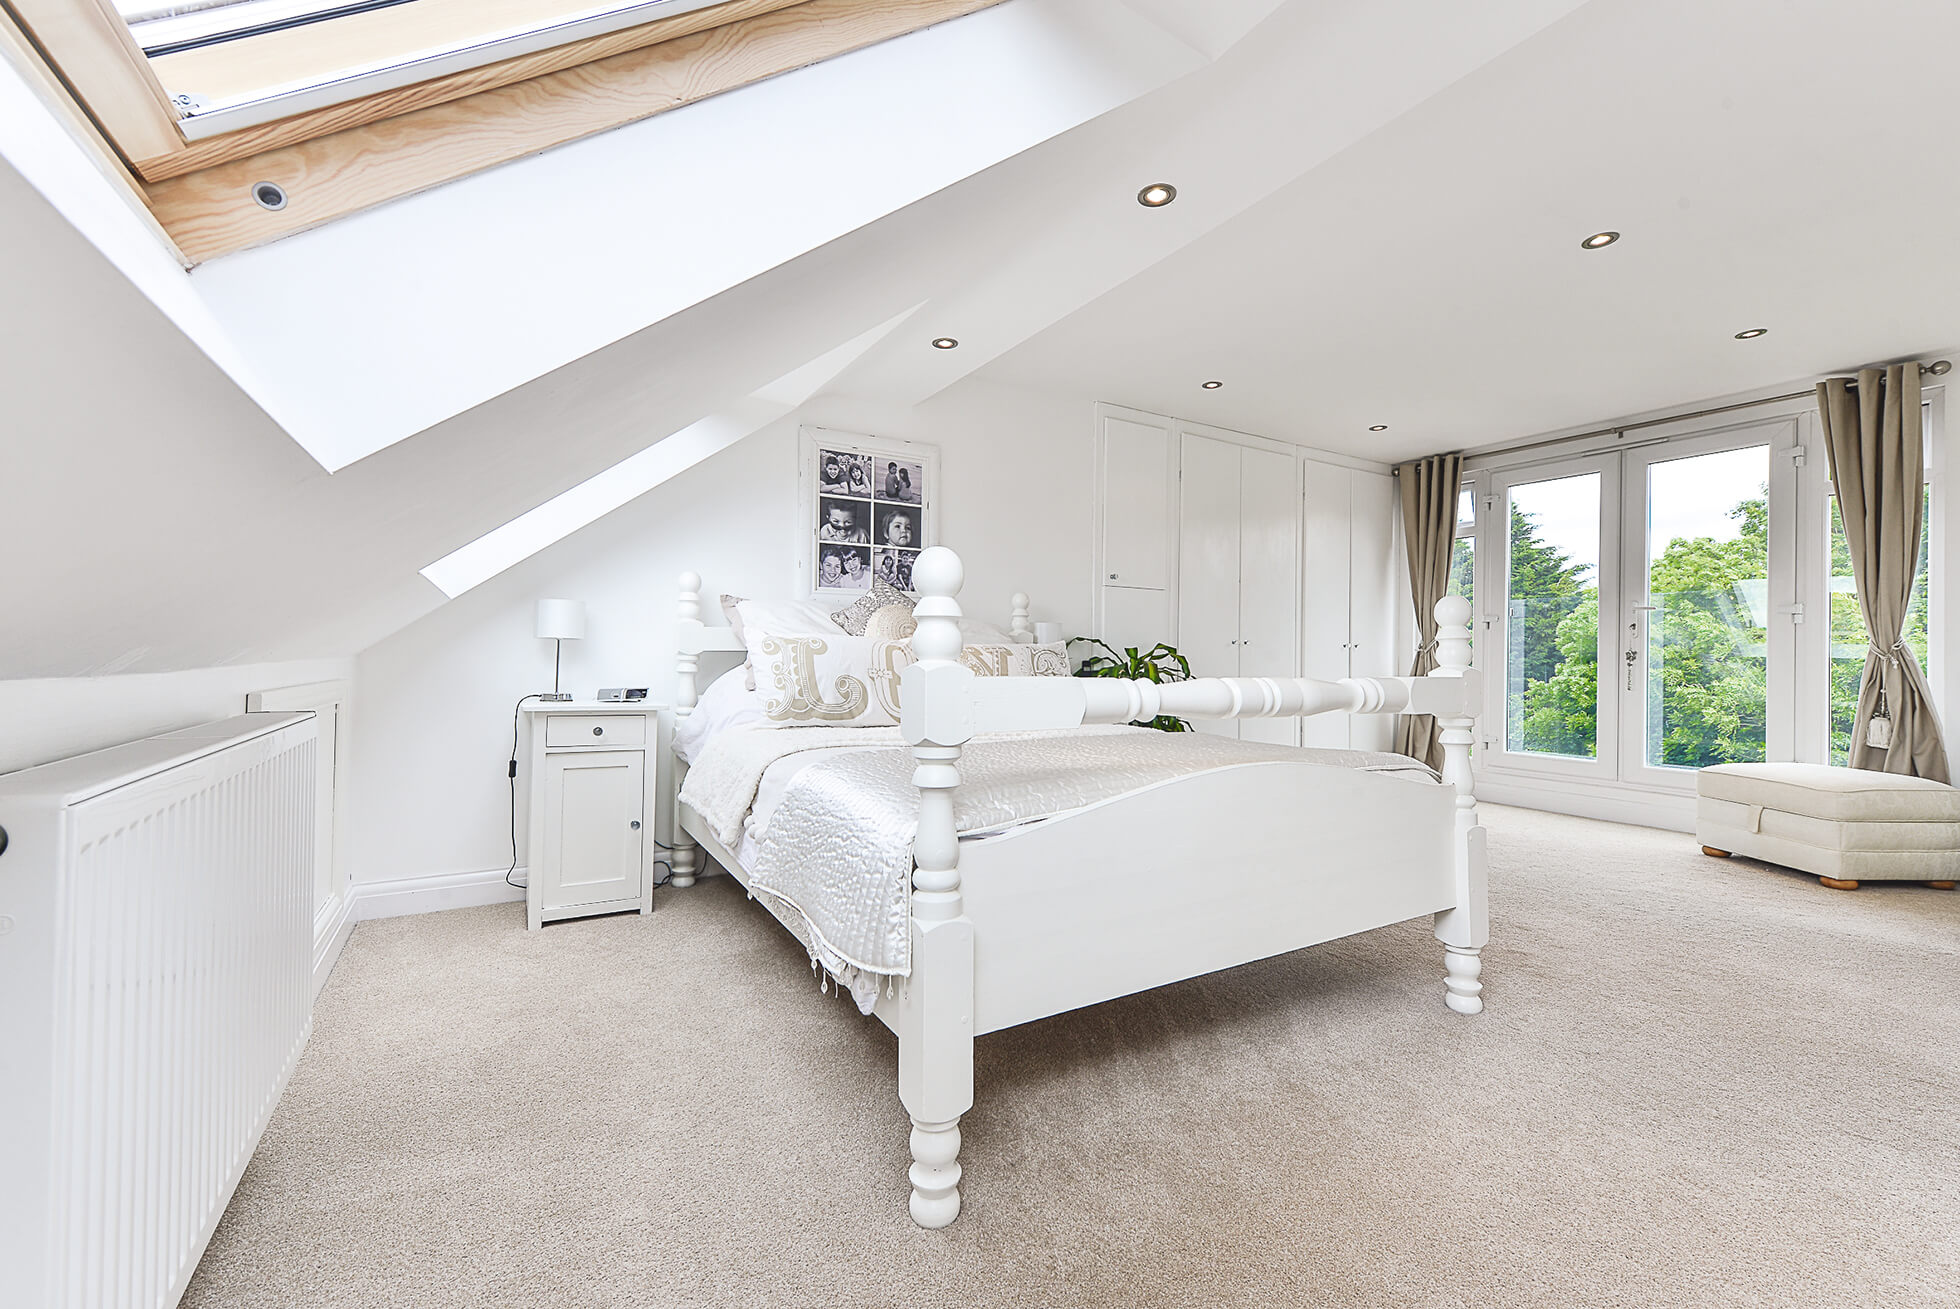 Do you have a question about converting your Loft in Ashwell? Here are the most popular questions asked by our clients.